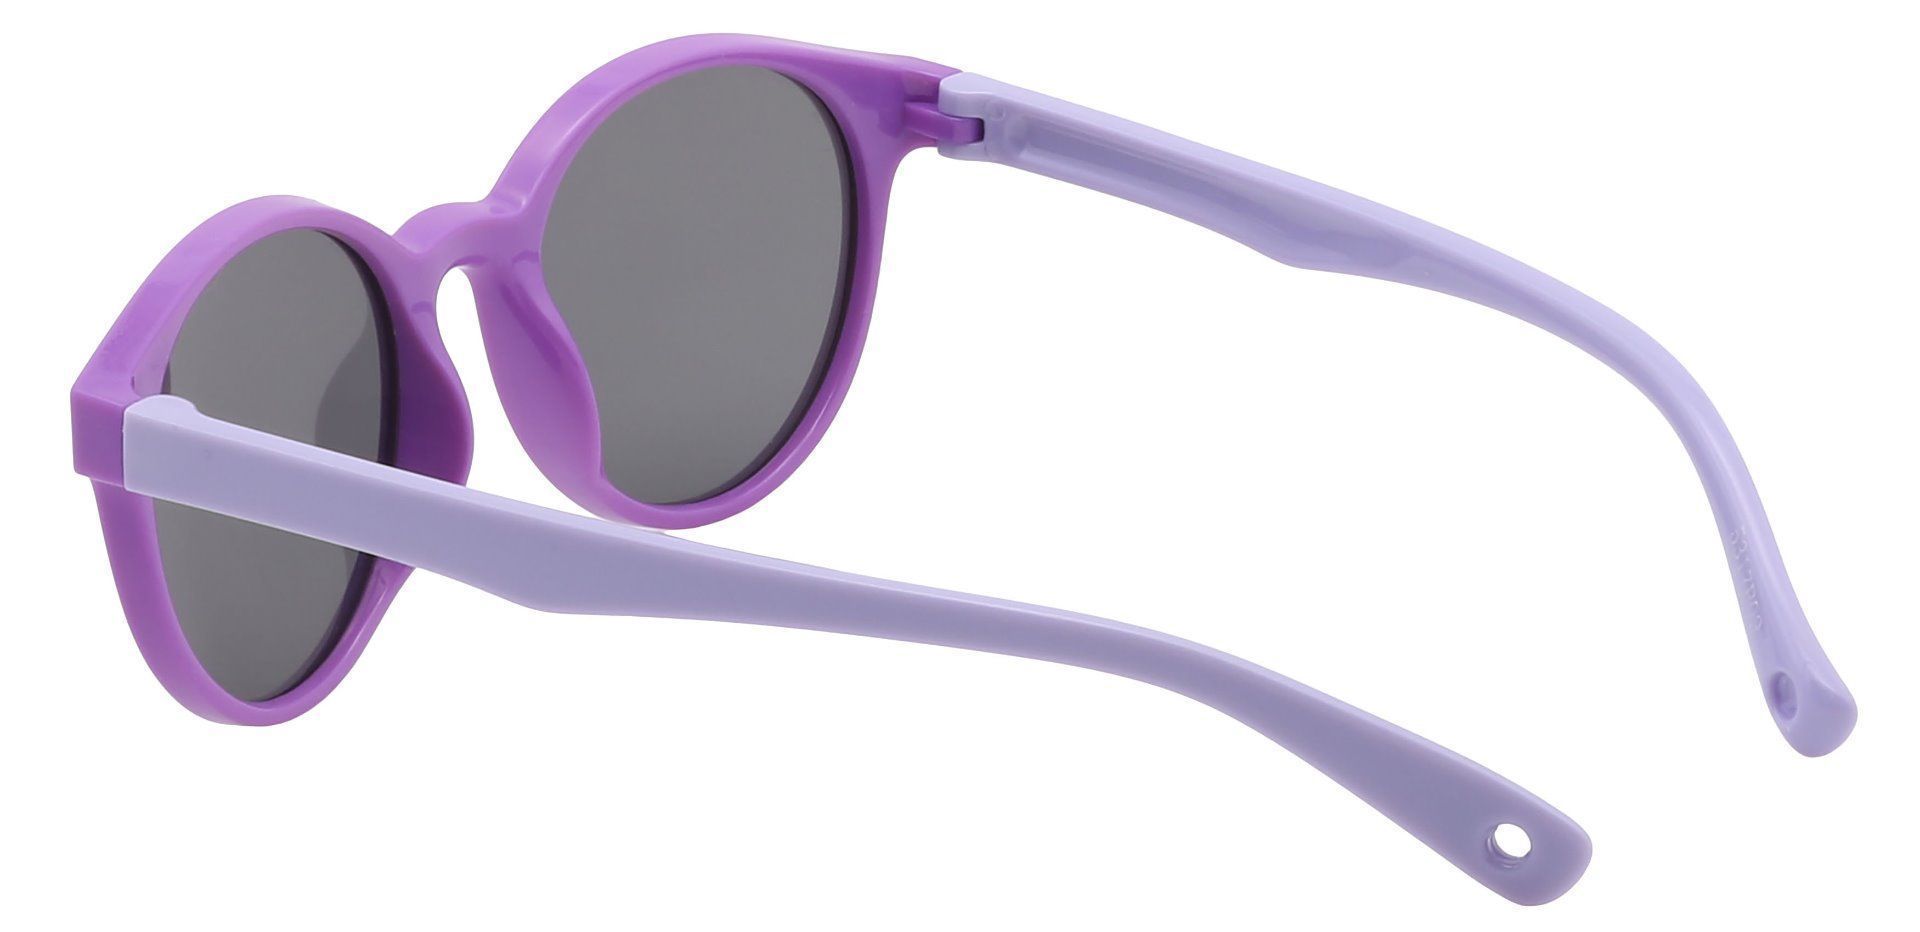 Harris Round Reading Sunglasses - Purple Frame With Gray Lenses